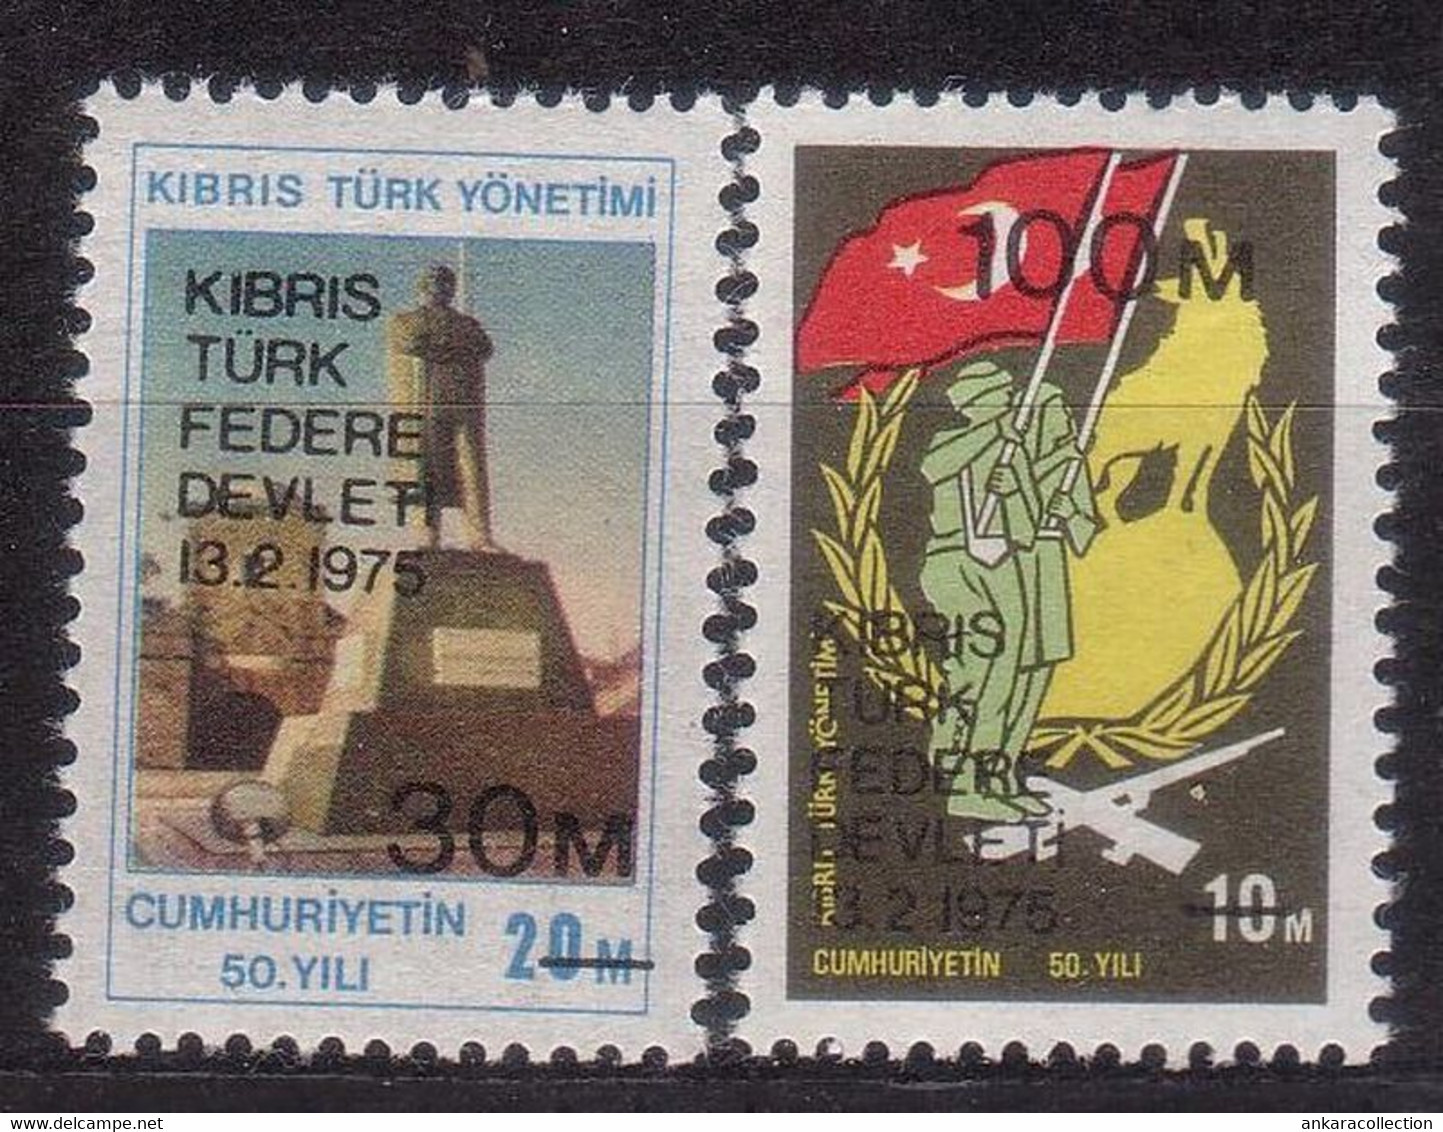 AC - NORTHERN CYPRUS STAMP - FOUNDATION OF FEDERAL STATE OF TURKISH CYPRUS MNH 03 MARCH 1975 - Nuovi